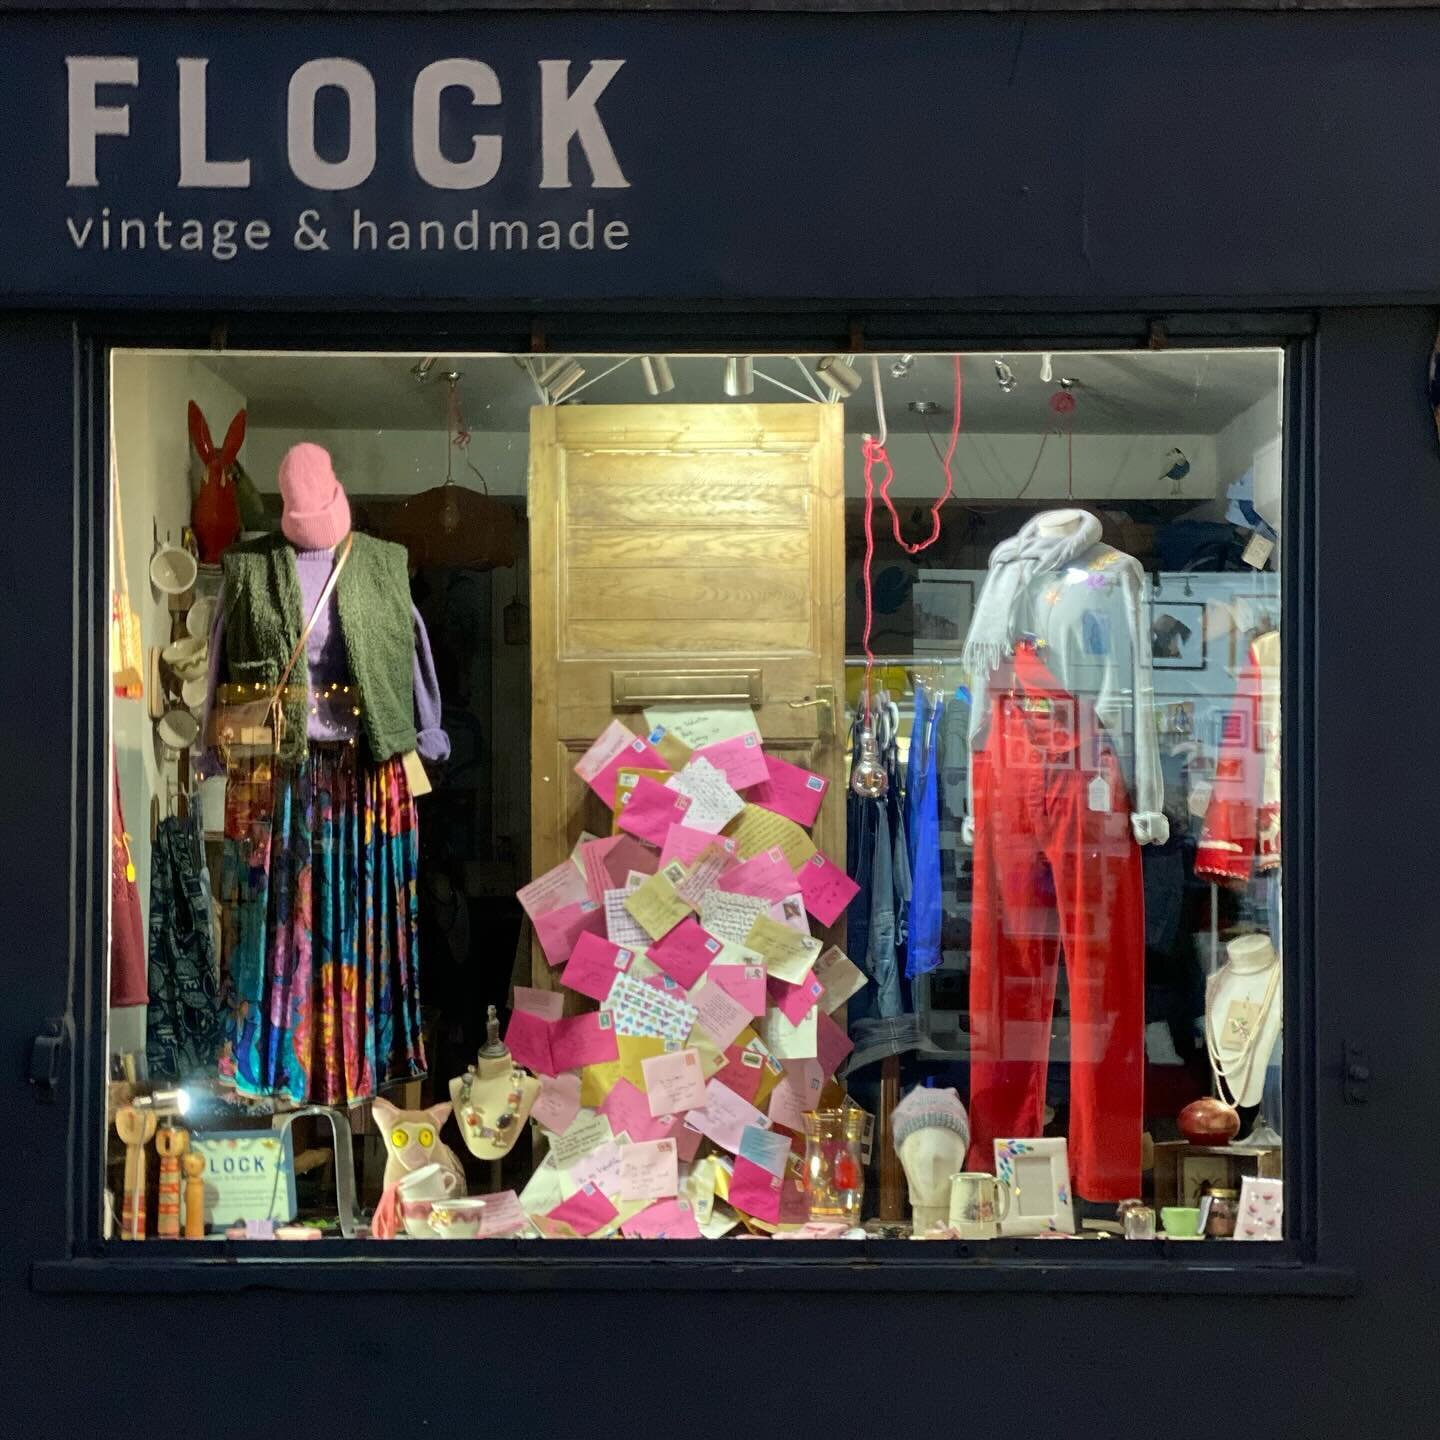 &lsquo;Love letters straight from your heart&rsquo;&hellip;
We are feeling the love here at Flock with our Valentines window 🩷

We have lots of lovely new stock in store from all our makers and collectors including some special treats for your valen